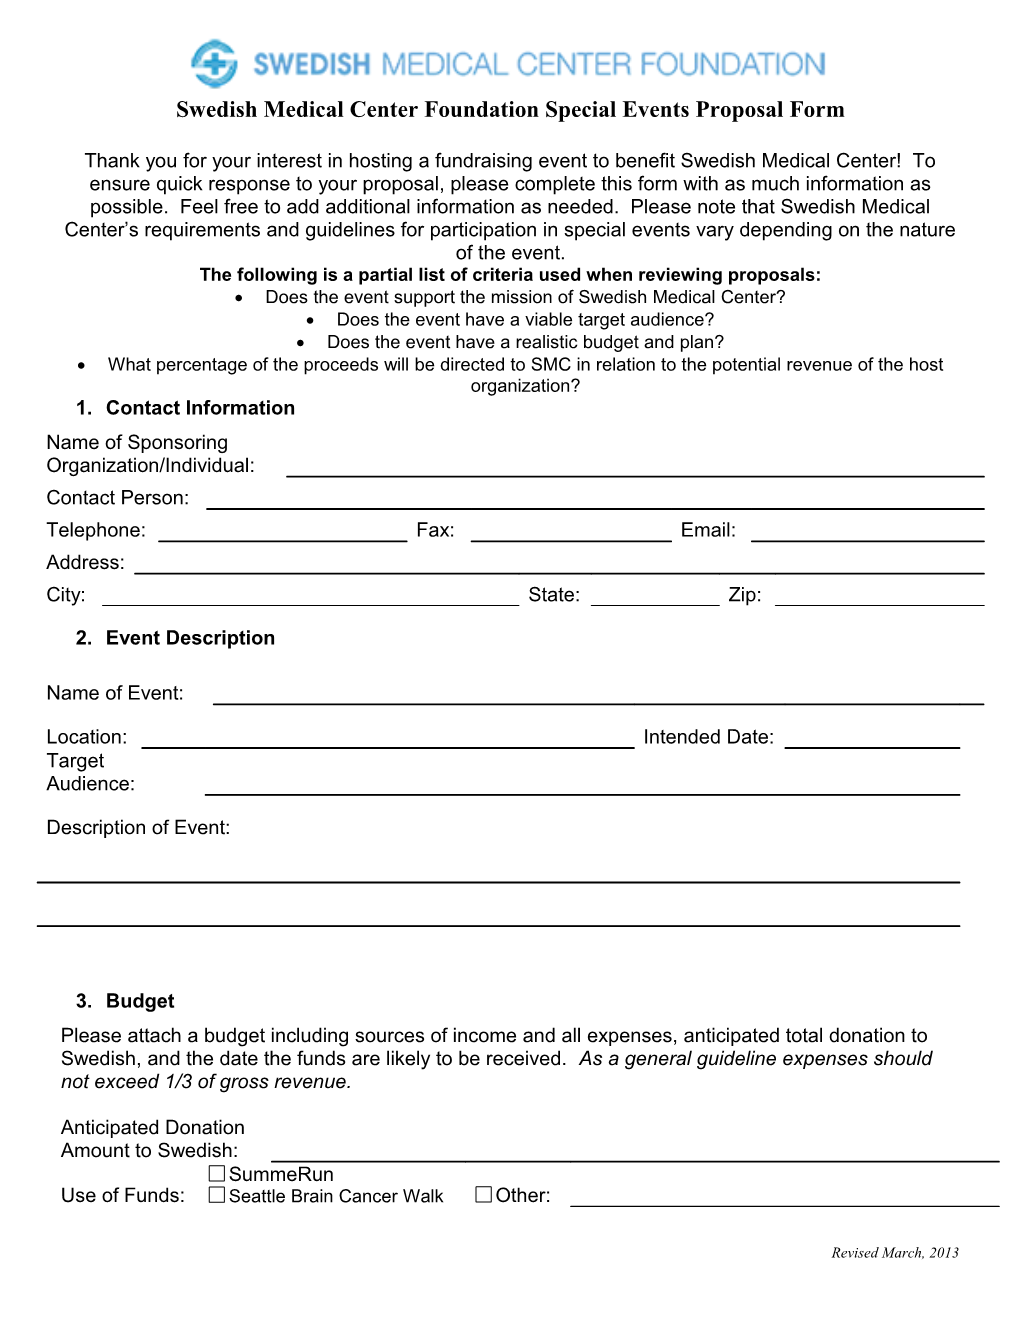 Swedish Medical Center Foundation Special Events Proposal Form